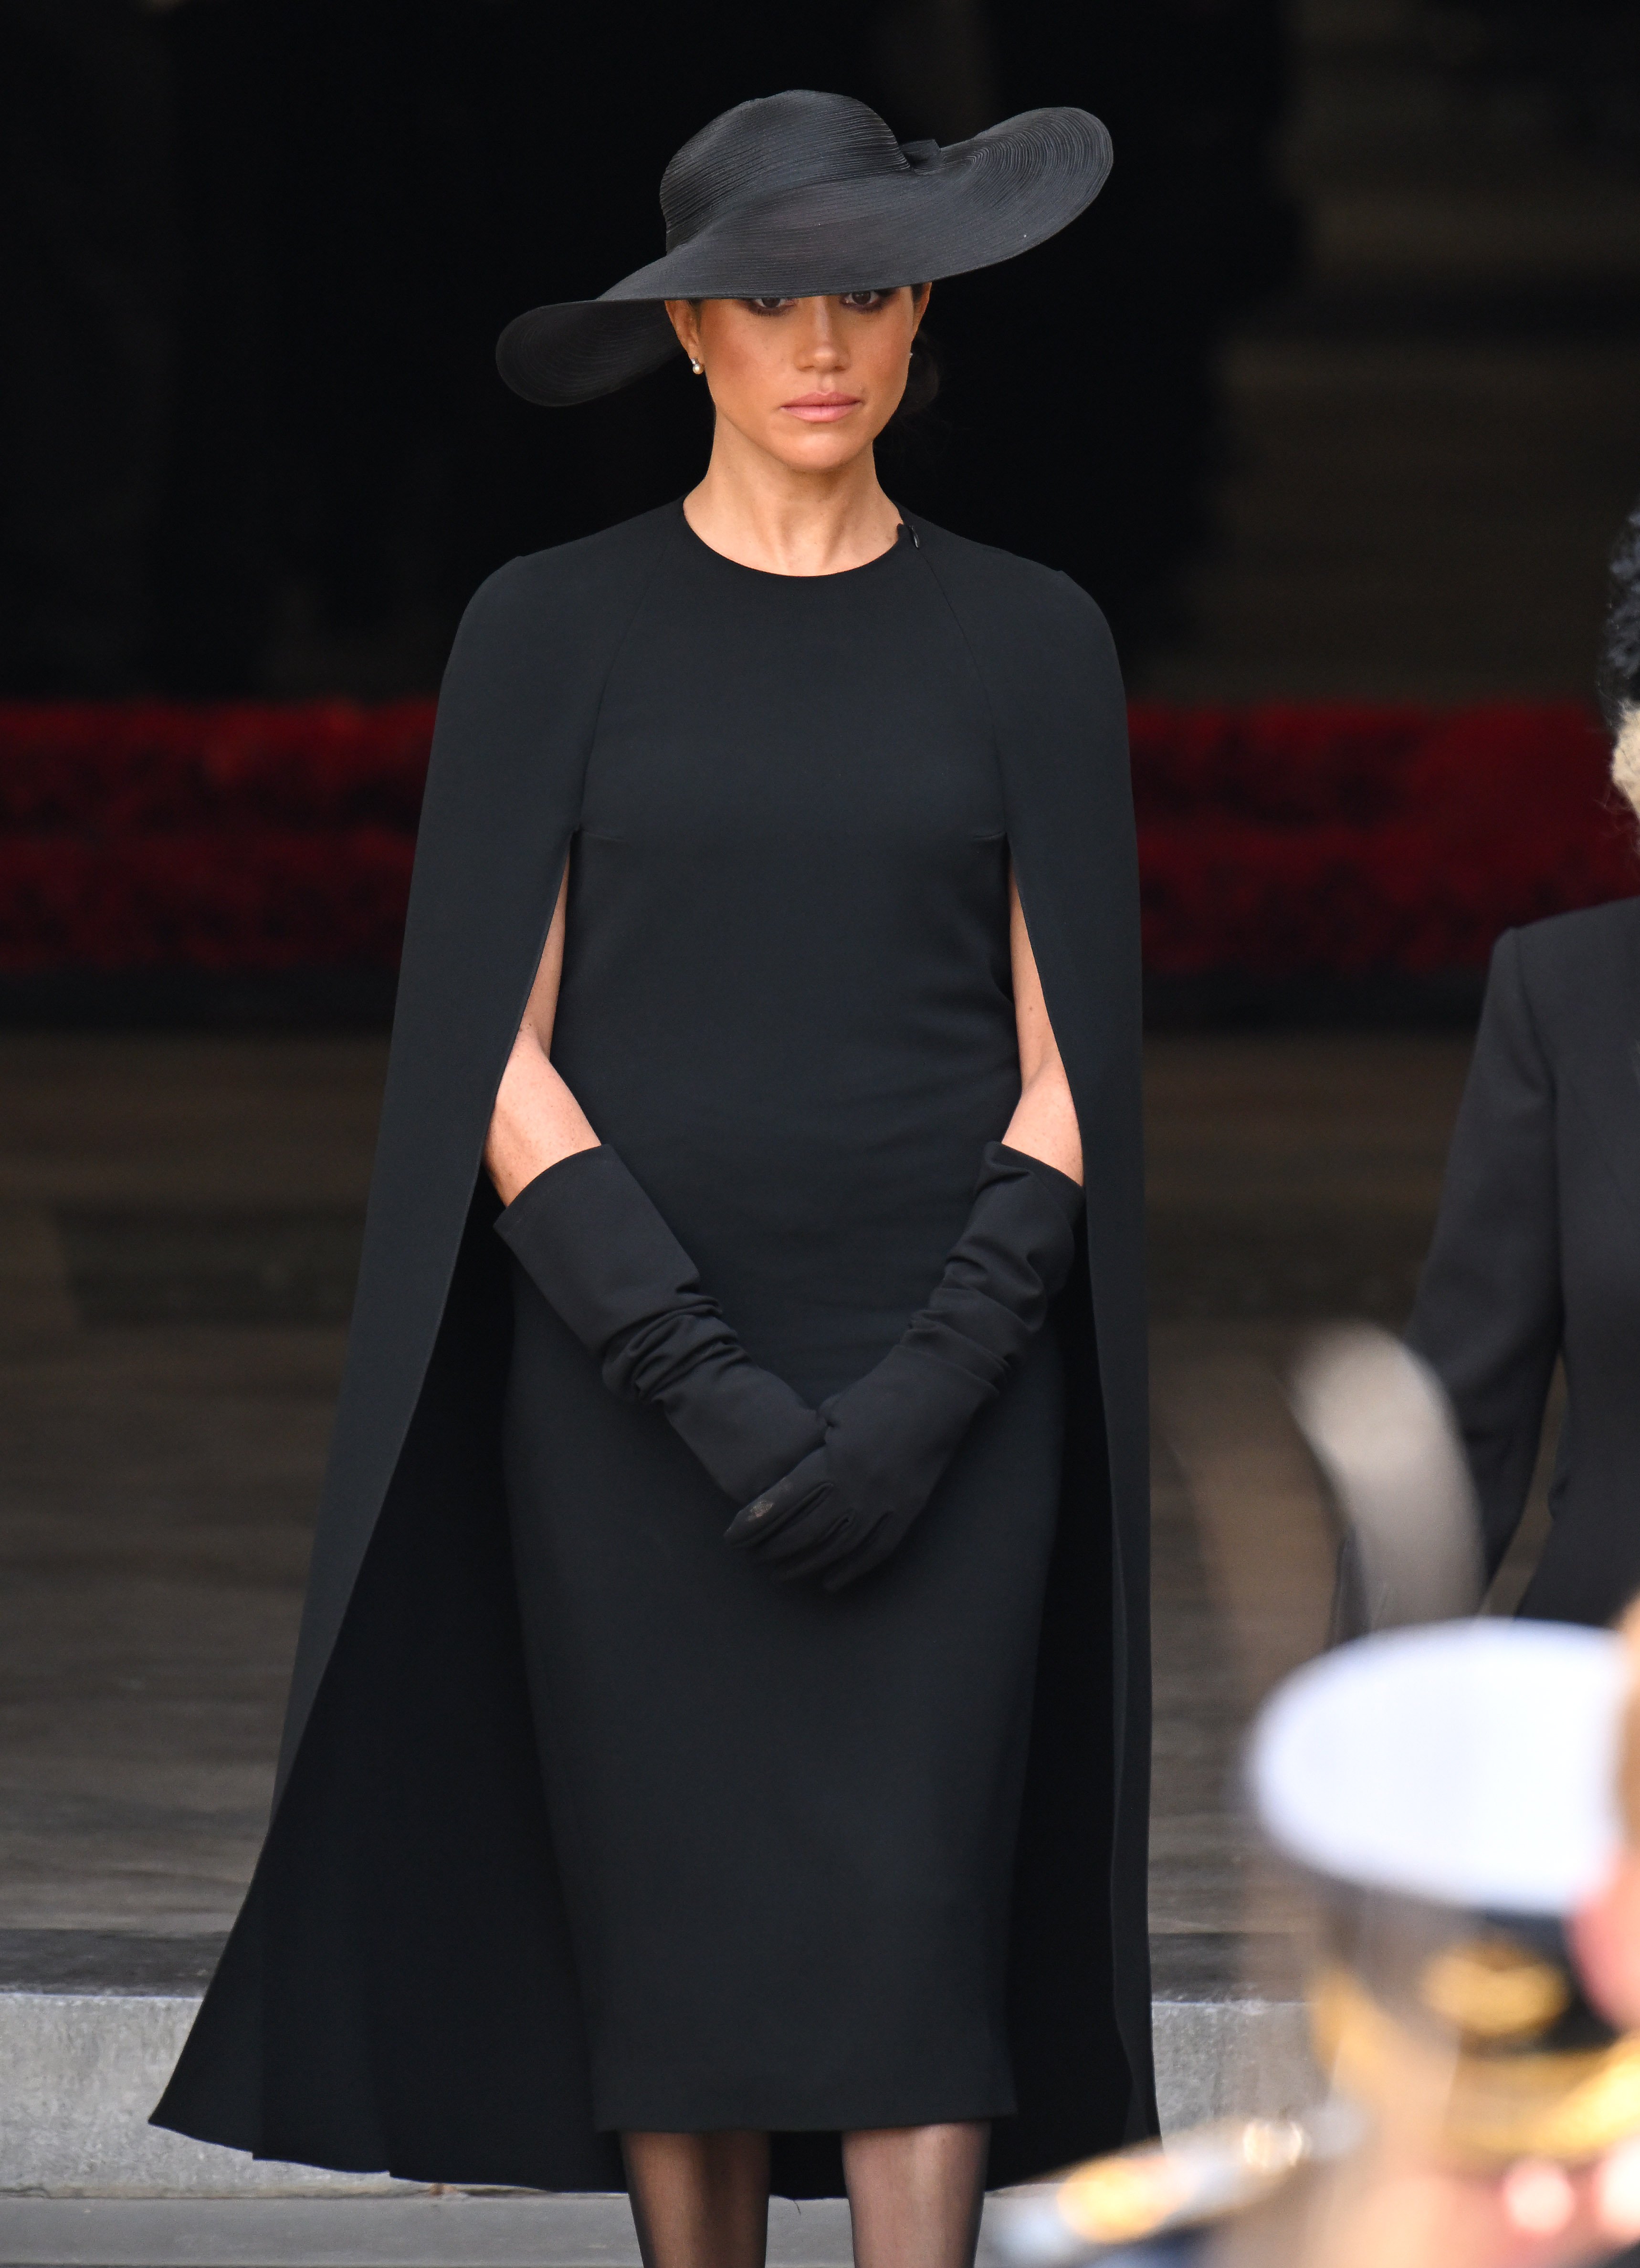 Meghan, Duchess of Sussex during the State Funeral of Queen Elizabeth II at Westminster Abbey on September 19, 2022 in London, England | Source: Getty Images 